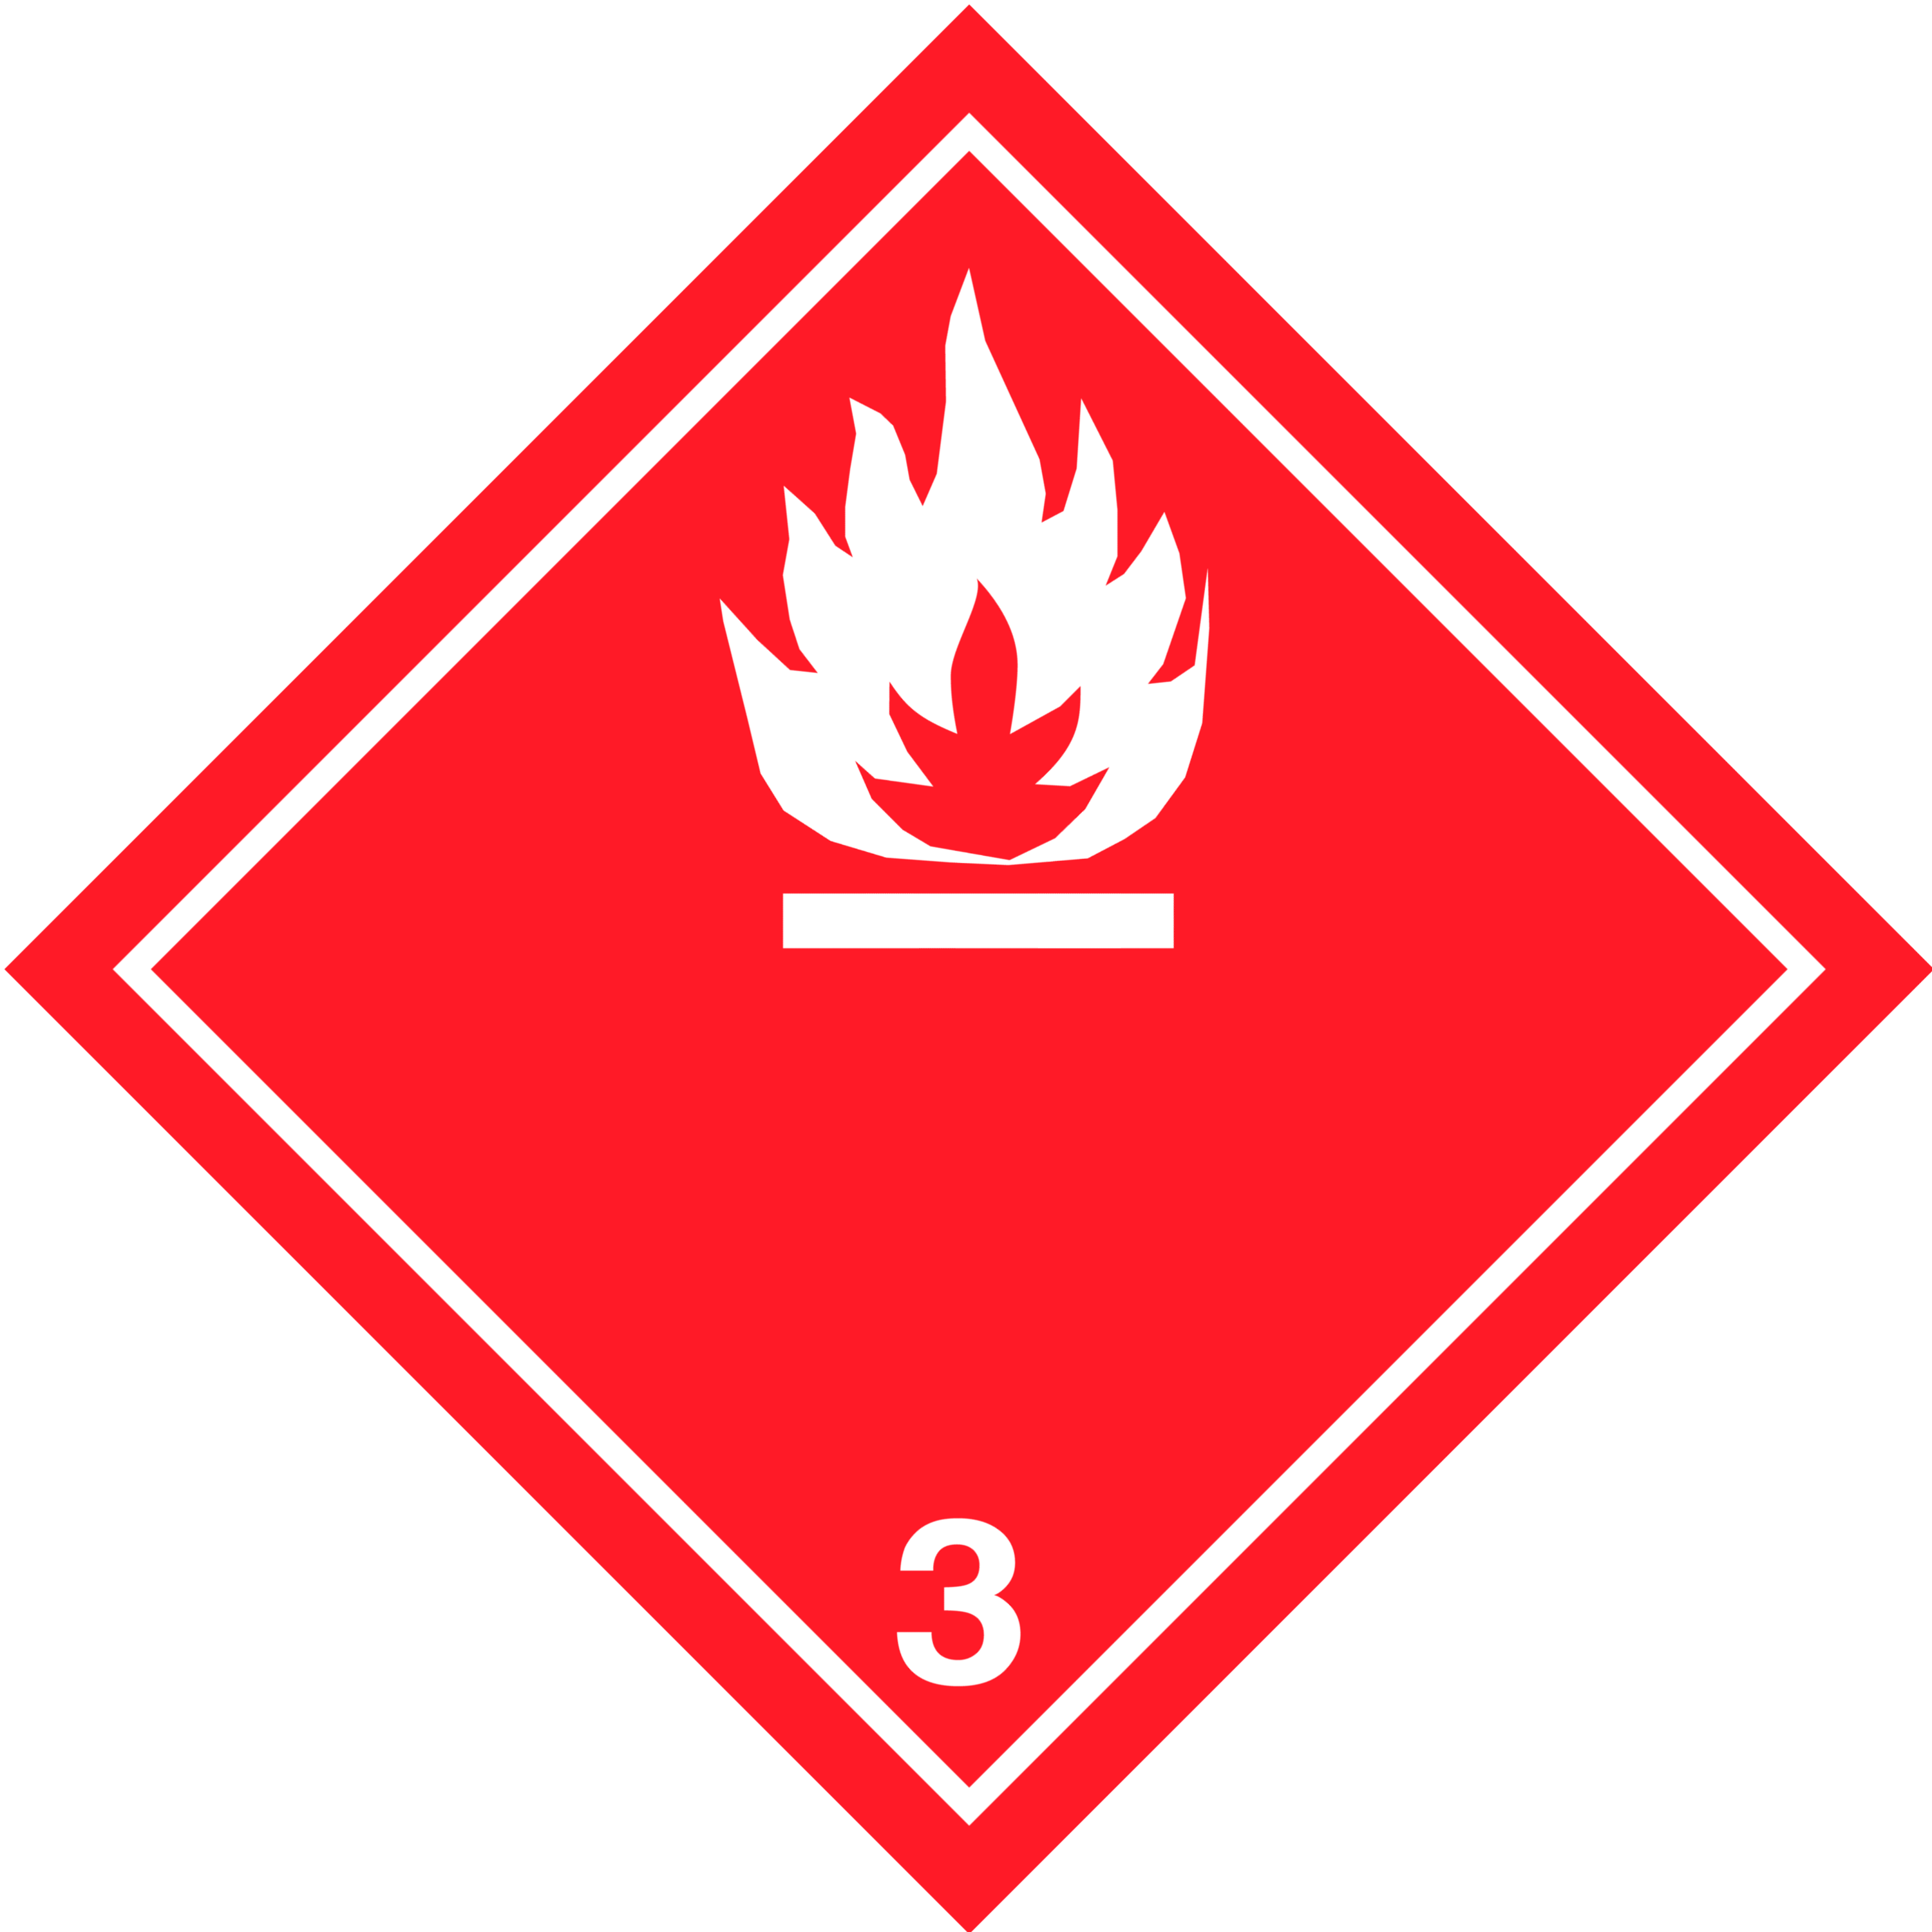 Signe inflammable Image Transparente